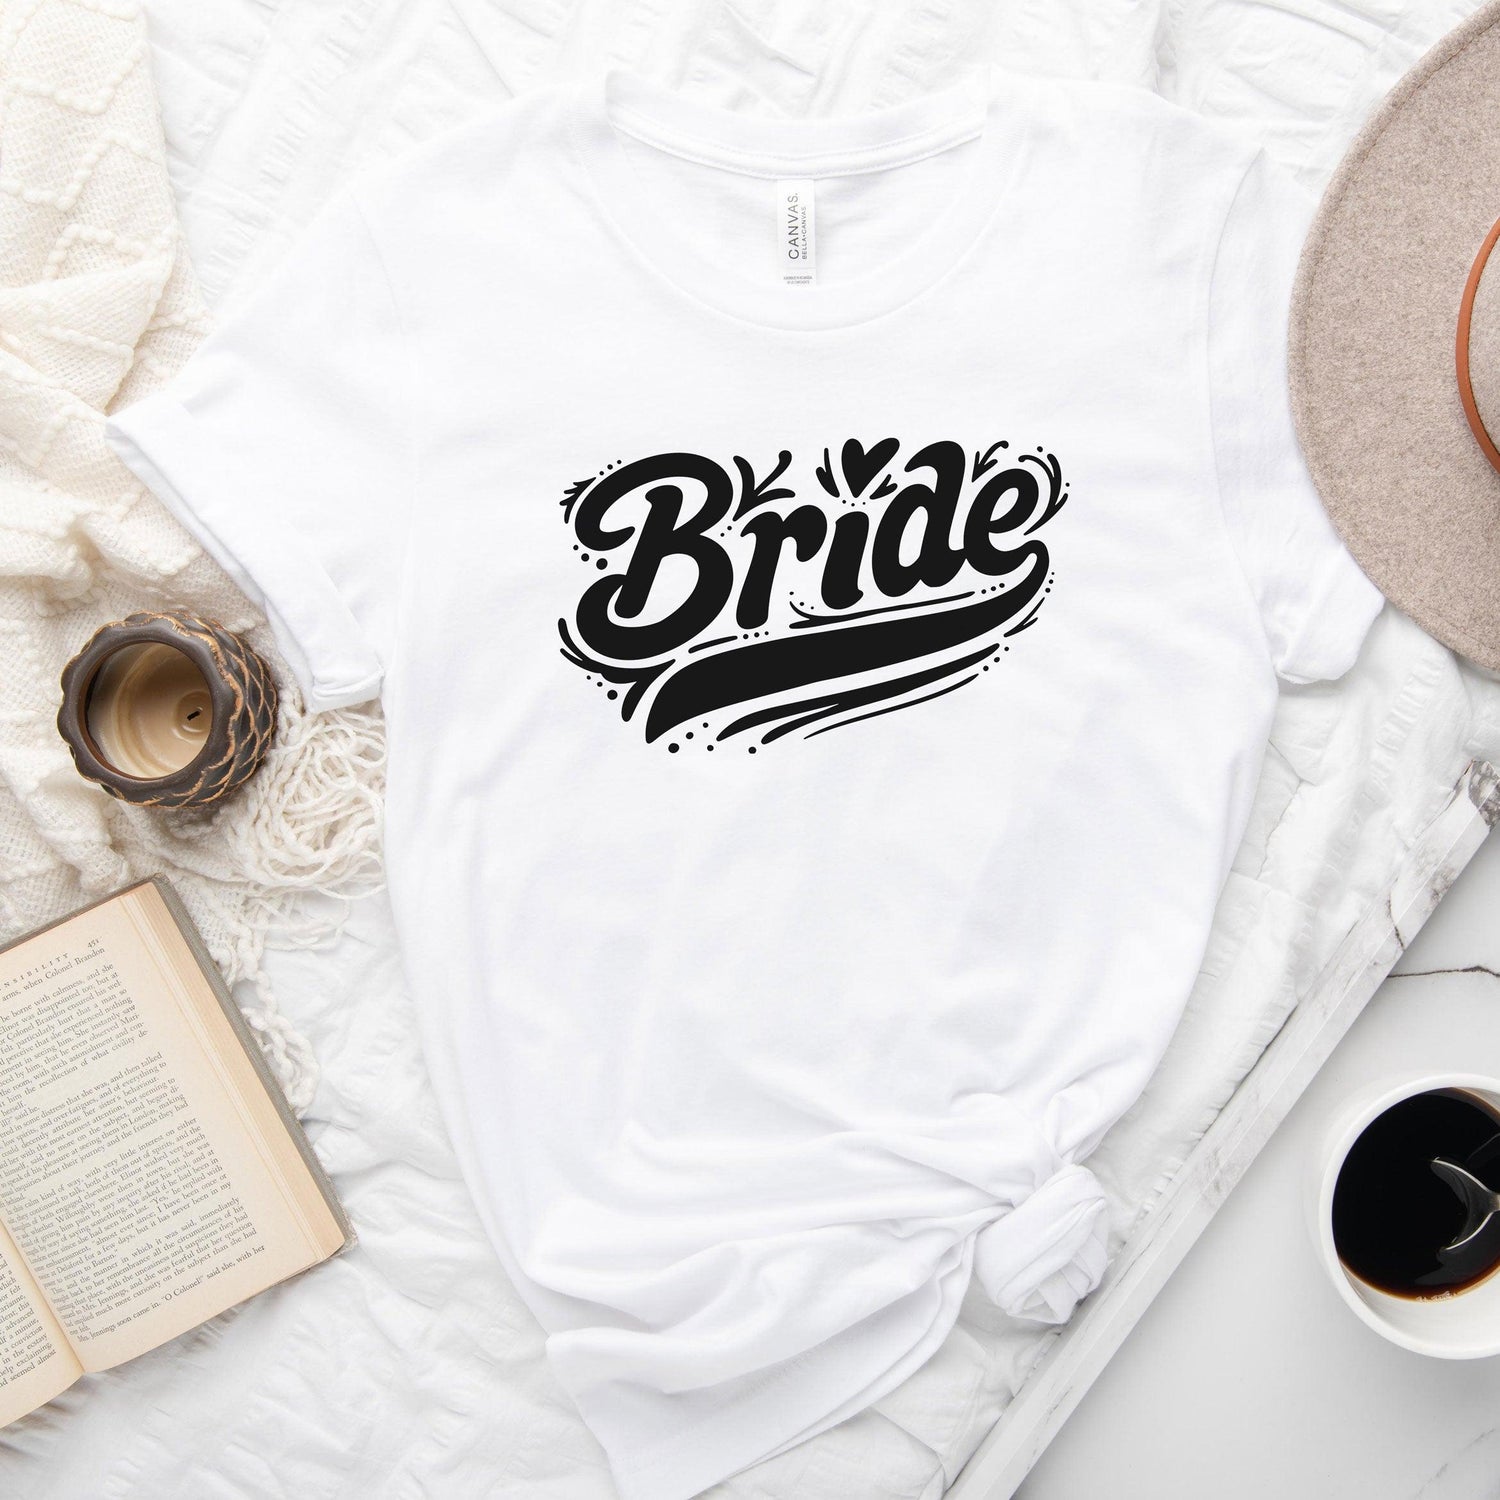 Bride Short-Sleeve Tee - Plus Sizes Available by Oaklynn Lane